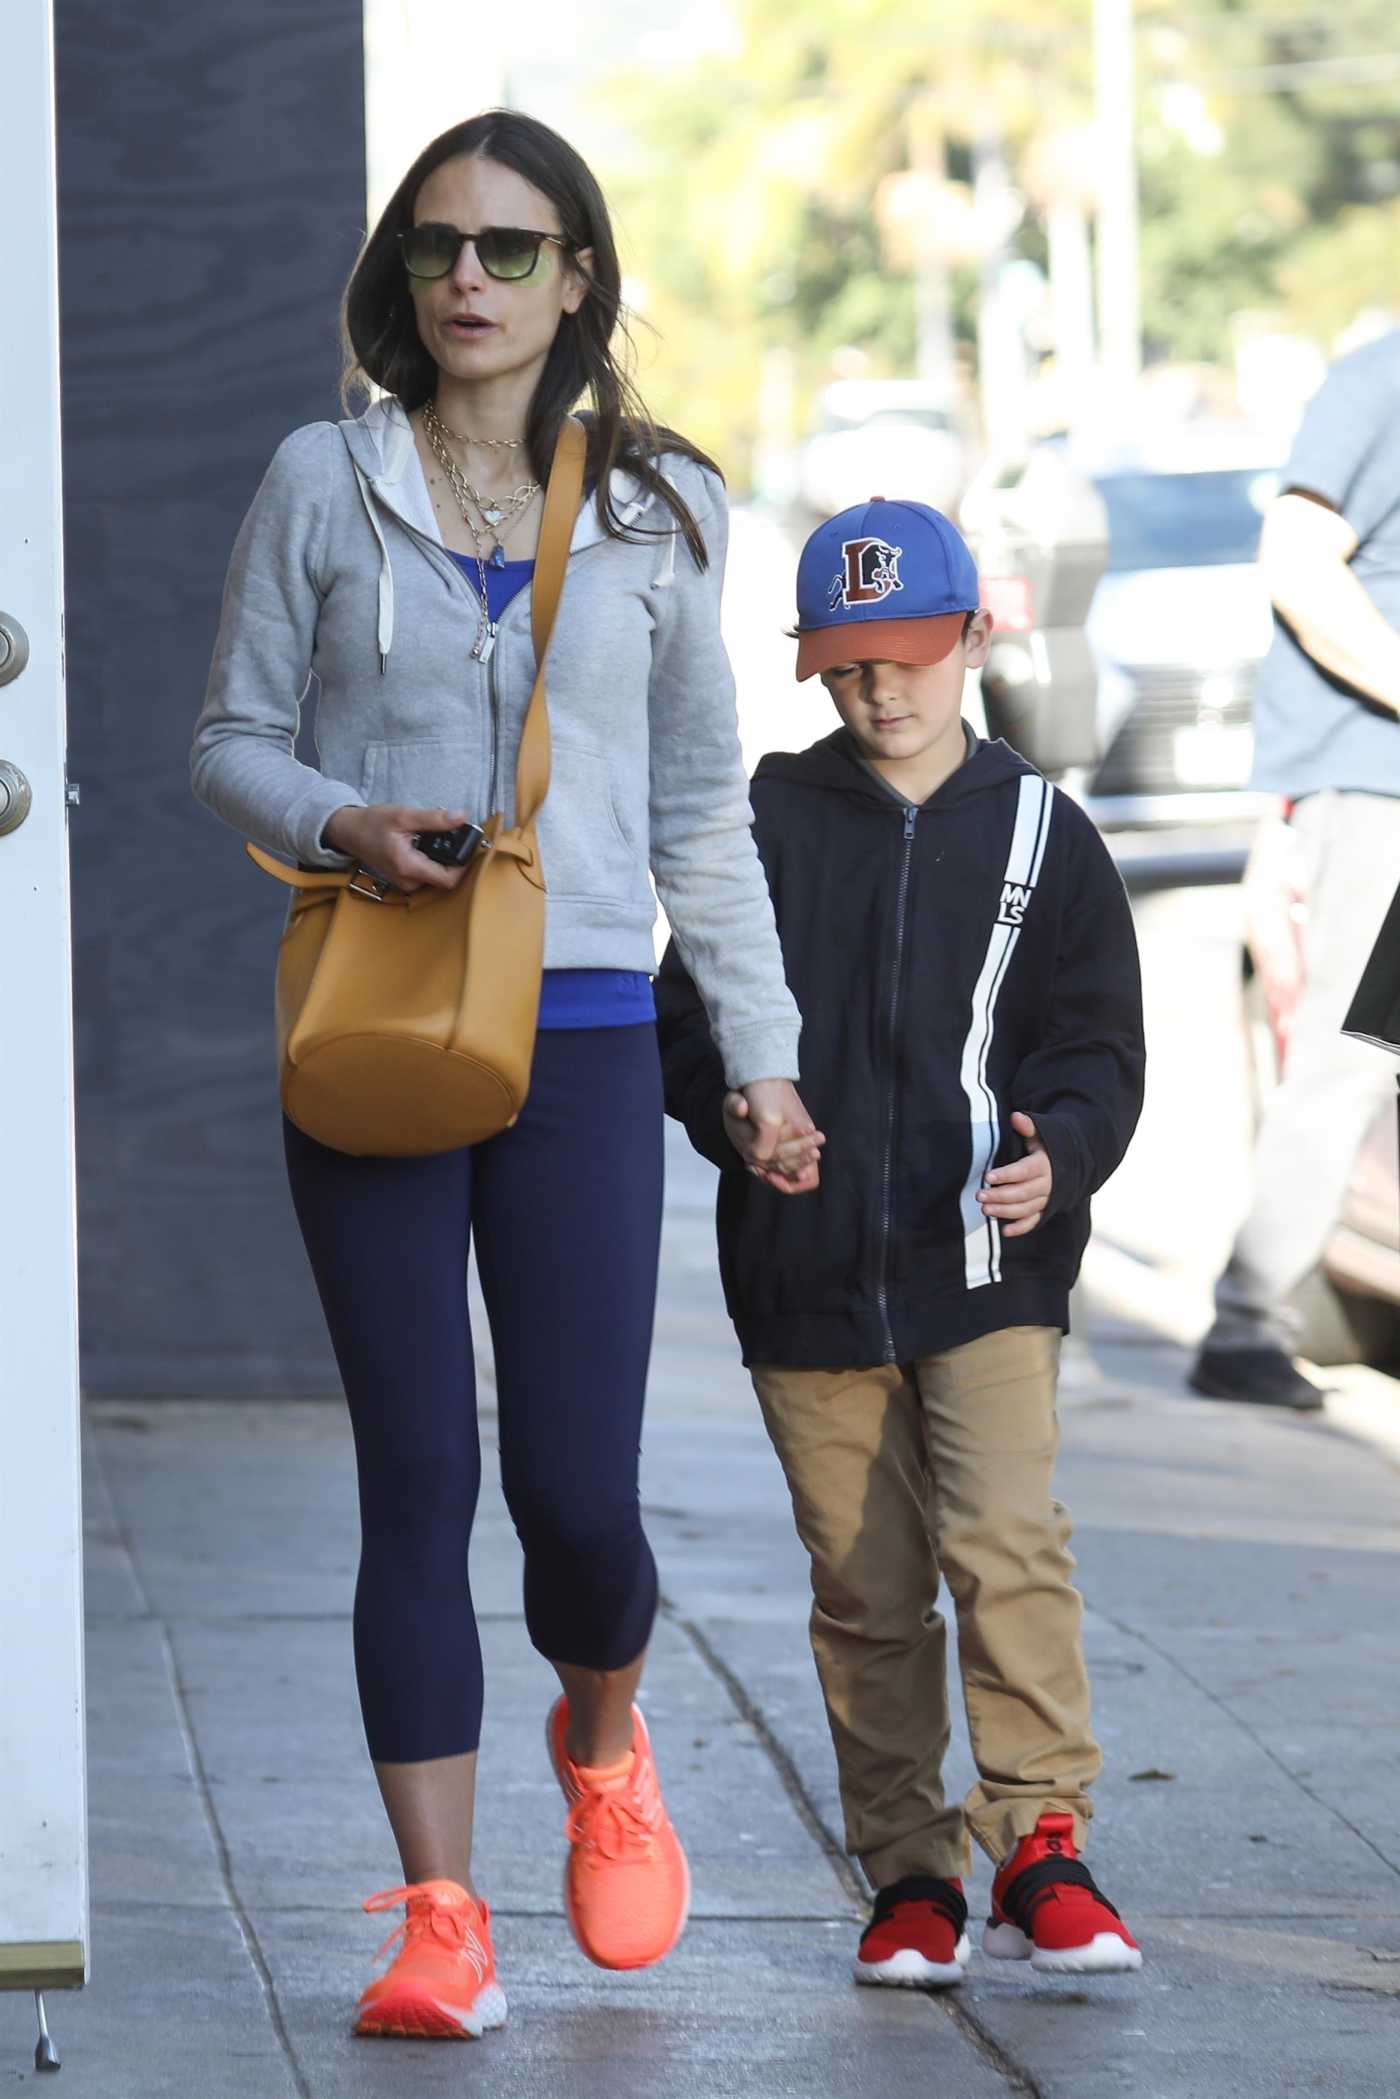 Jordana Brewster in an Orange Sneakers Was Spotted Out with Her Son in Pacific Palisades 03/09/2022